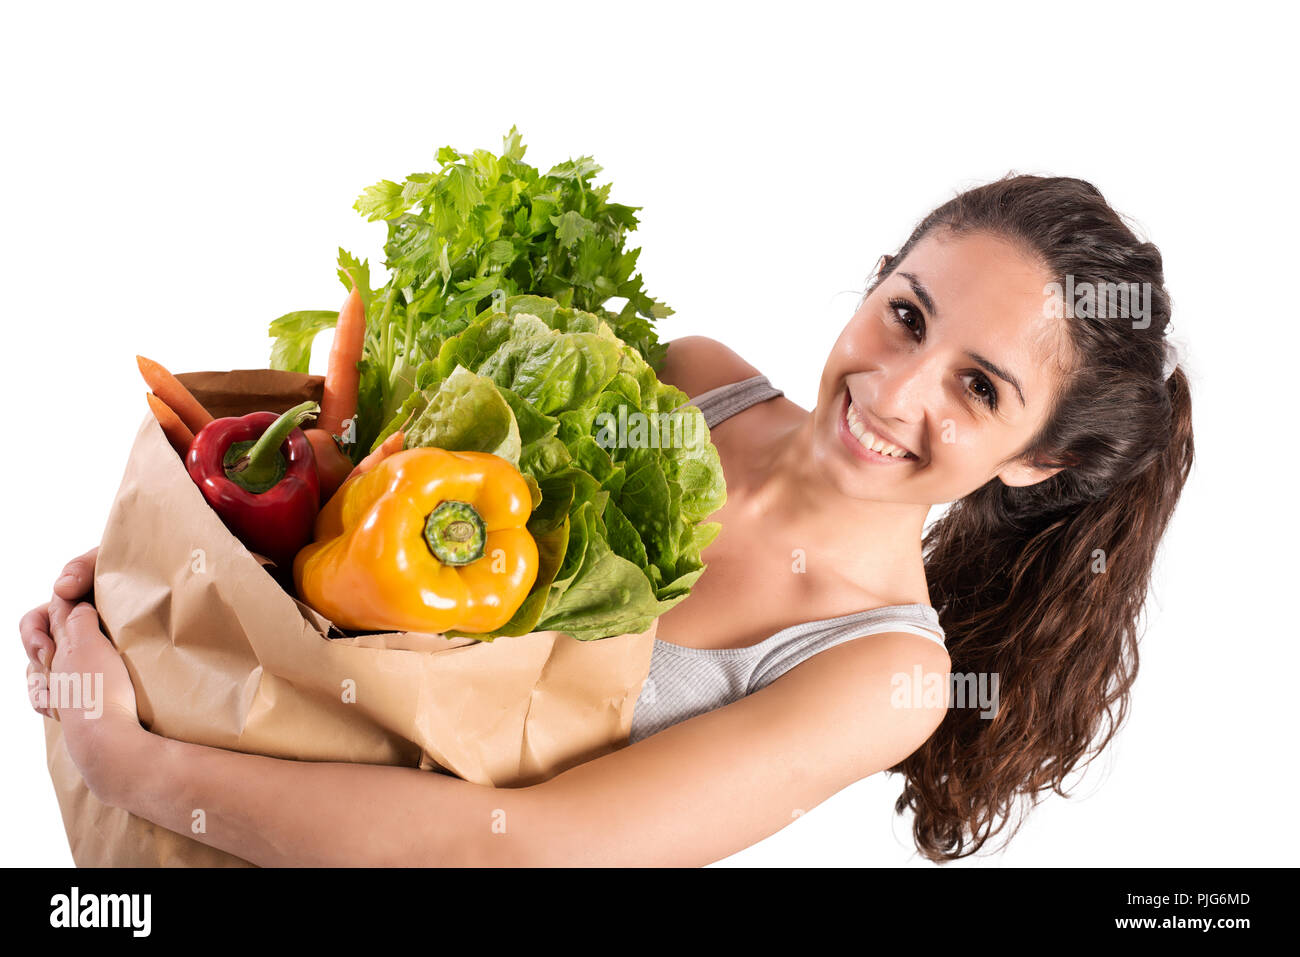 Bio shopping concept with girl at the super market with Stock Photo